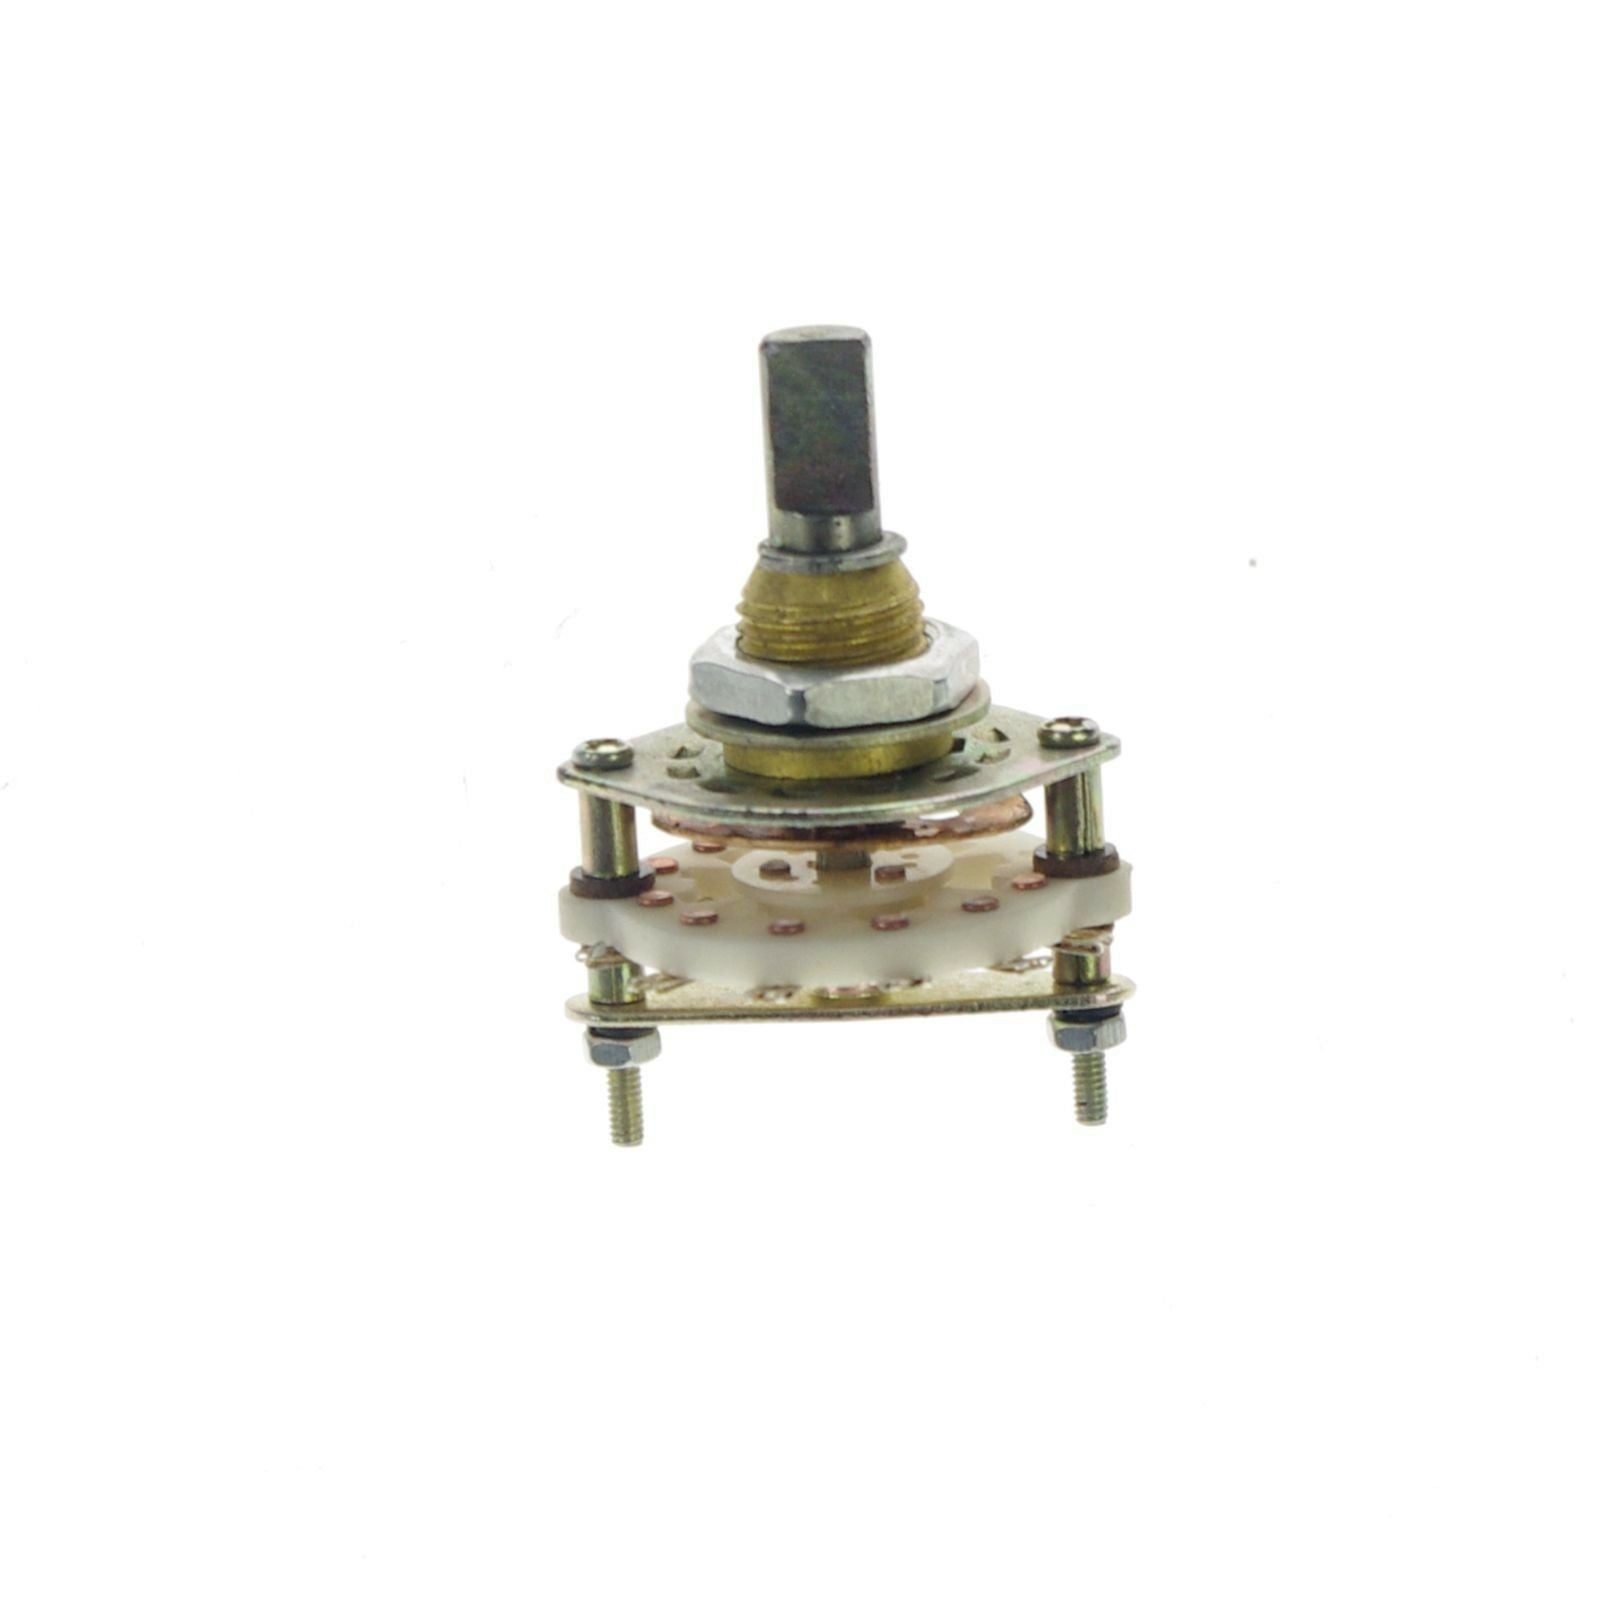 (1)Wave-band Rotary Switch 1 contact 11 position 1 Deck Ceramic Rotate 10 times